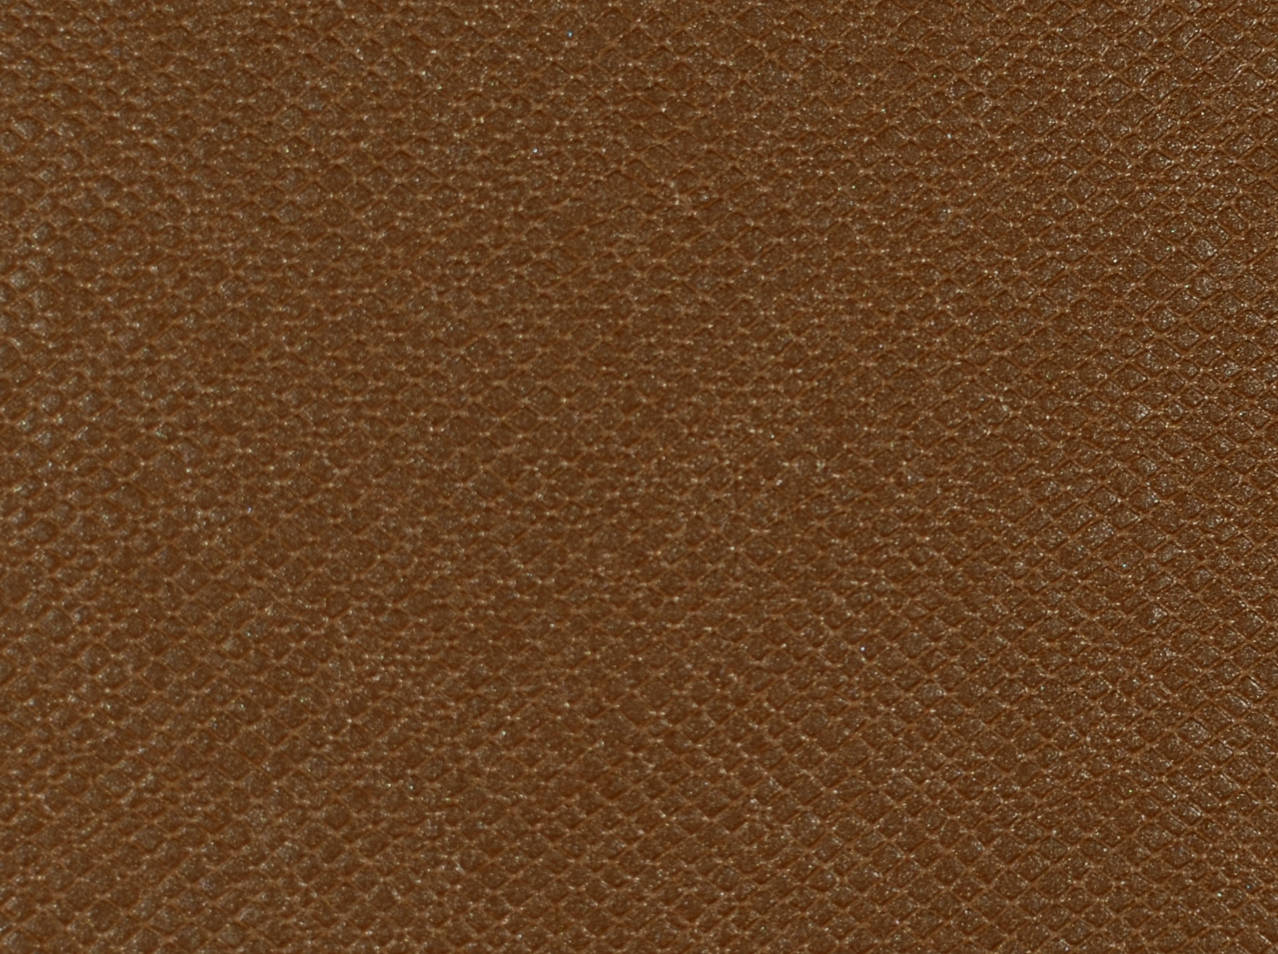 types of faux leather